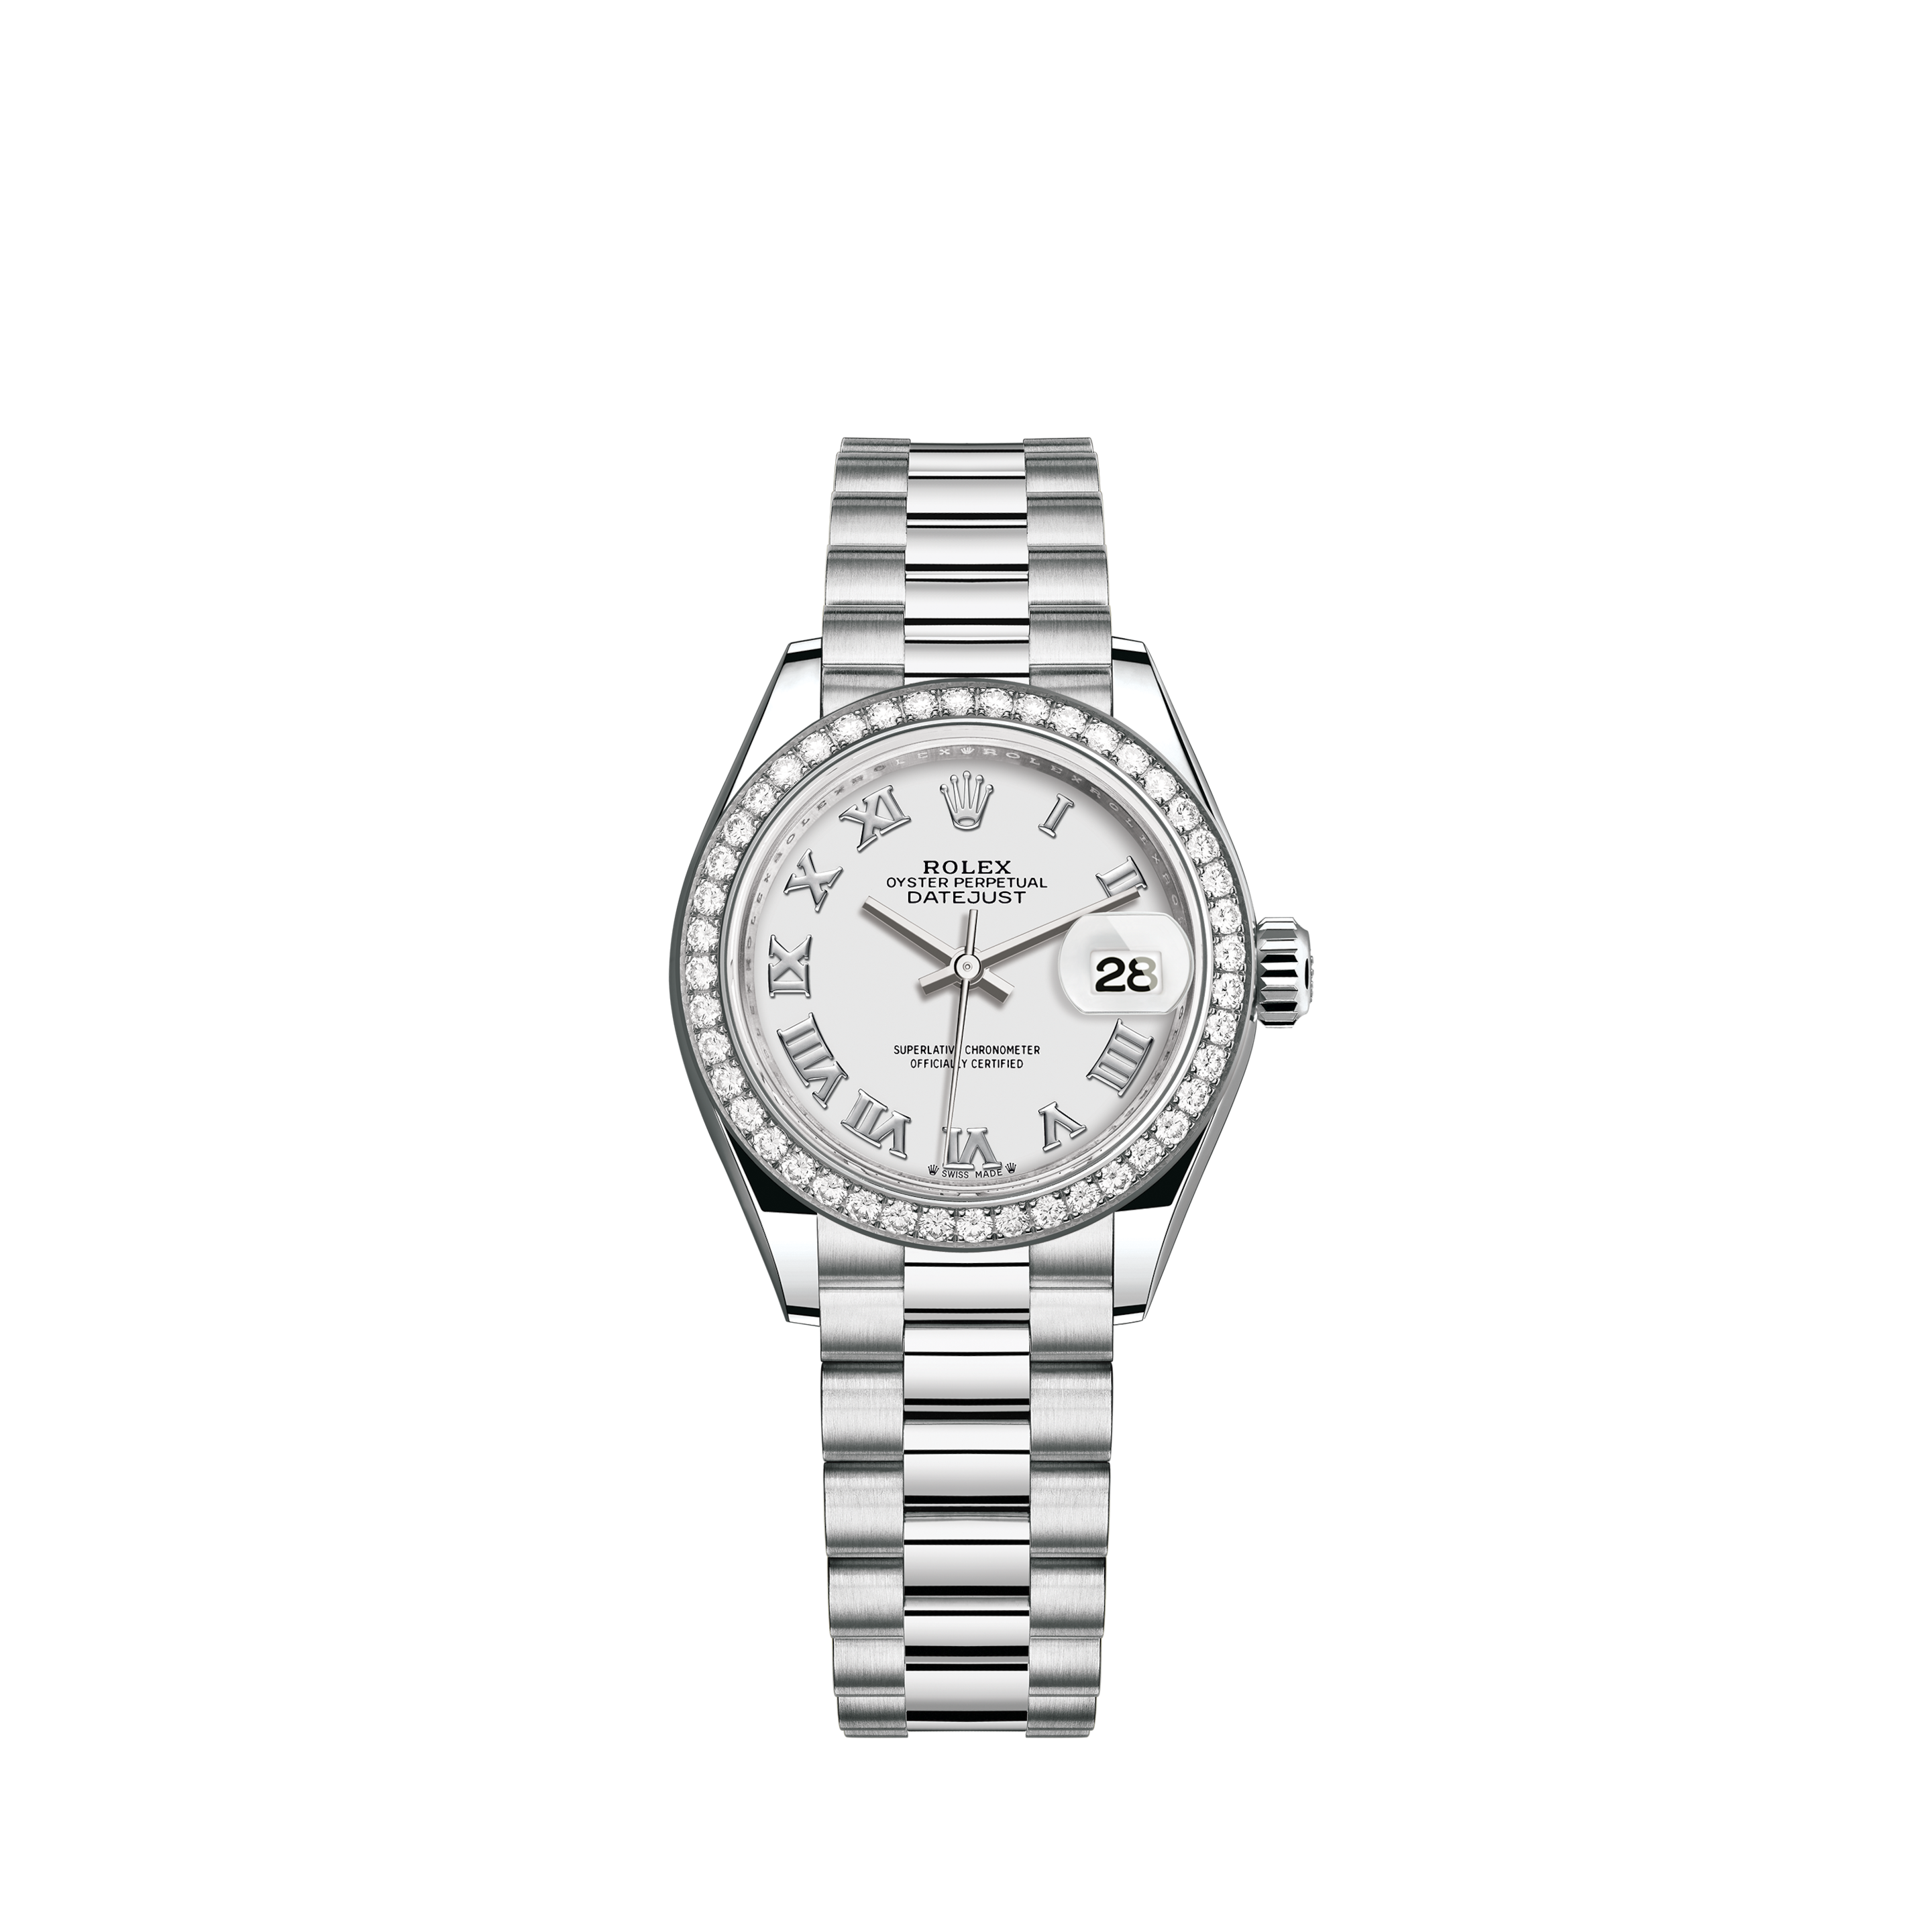 Rolex Lady Date Sigma Dial Automatik Stahl Damenuhr Oyster Perpetual Ref. 6916Rolex Pearl White Roman 26mm Datejust Two Tone 18K Gold + SS + Side Diamonds Oyster Band + Bezel